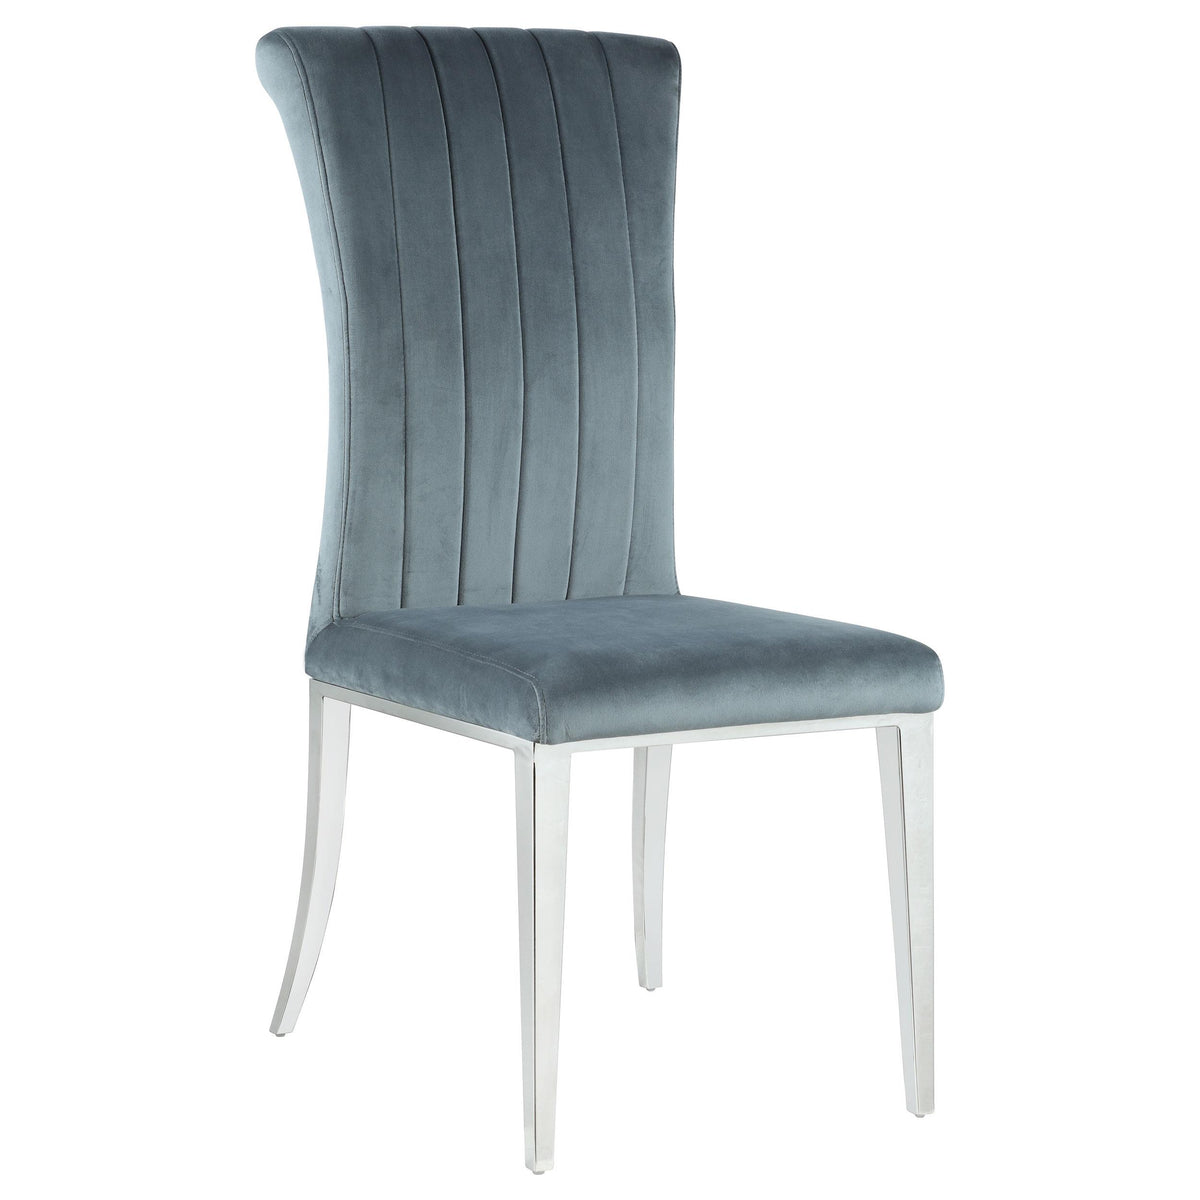 Beaufort Upholstered Curved Back Side Chairs Dark Grey (Set of 2)  Las Vegas Furniture Stores